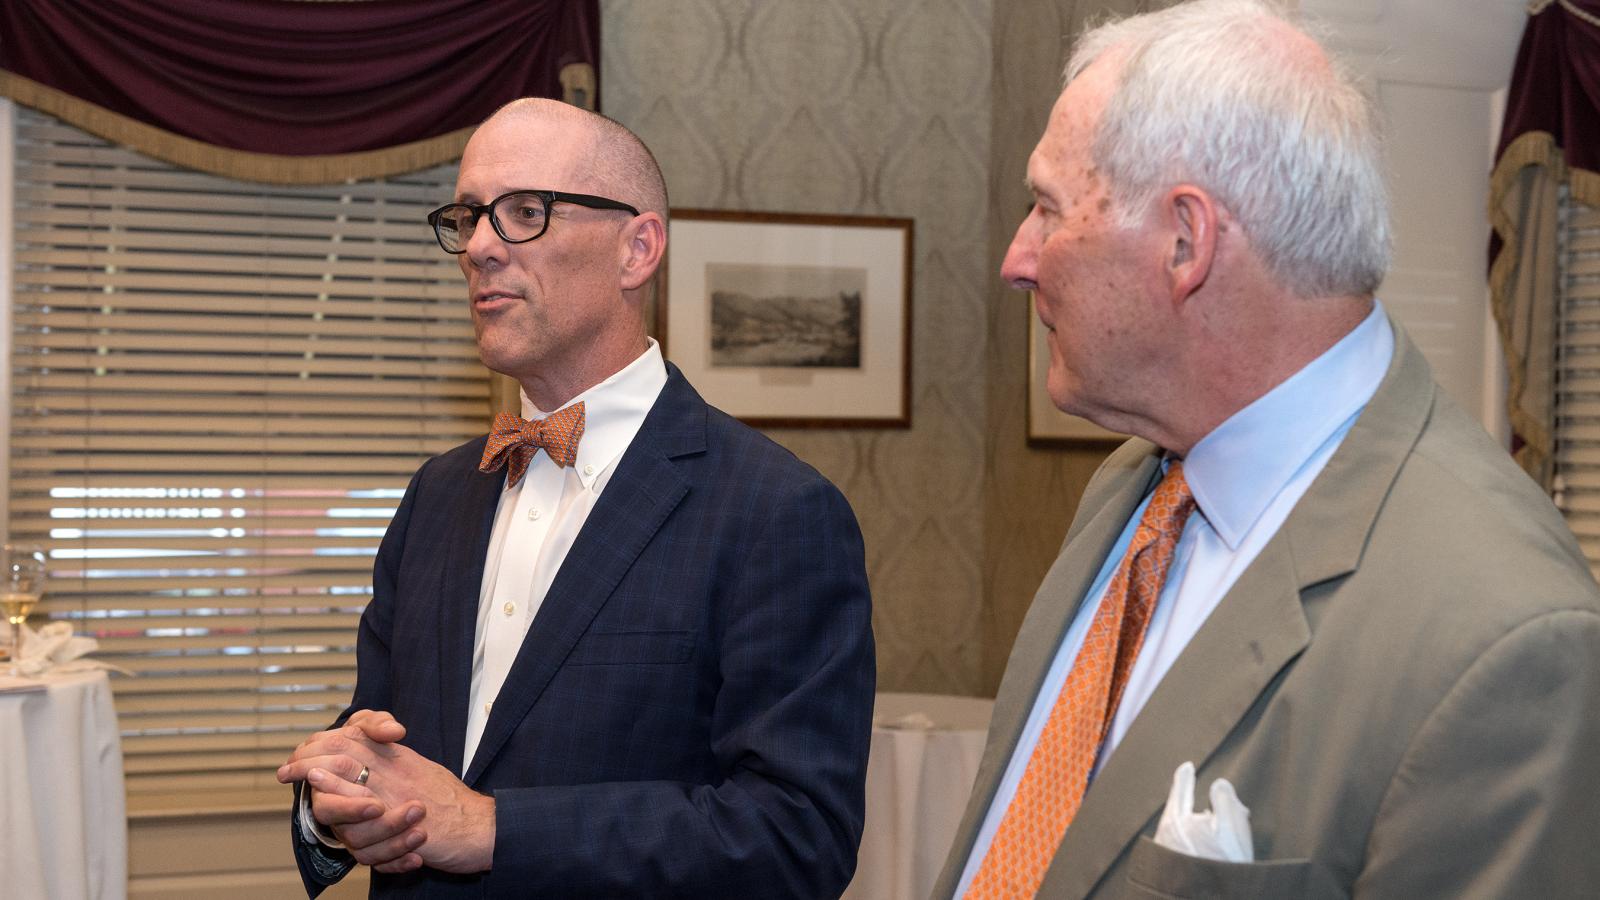 Gordon Smith, M.D., professor and chair of the Department of Neurology at VCU School of Medicine, stands alongside Charlie Bryan to thank Charlie’s classmates for their contributions and explain the important impact that funds like theirs have on early-stage research. 